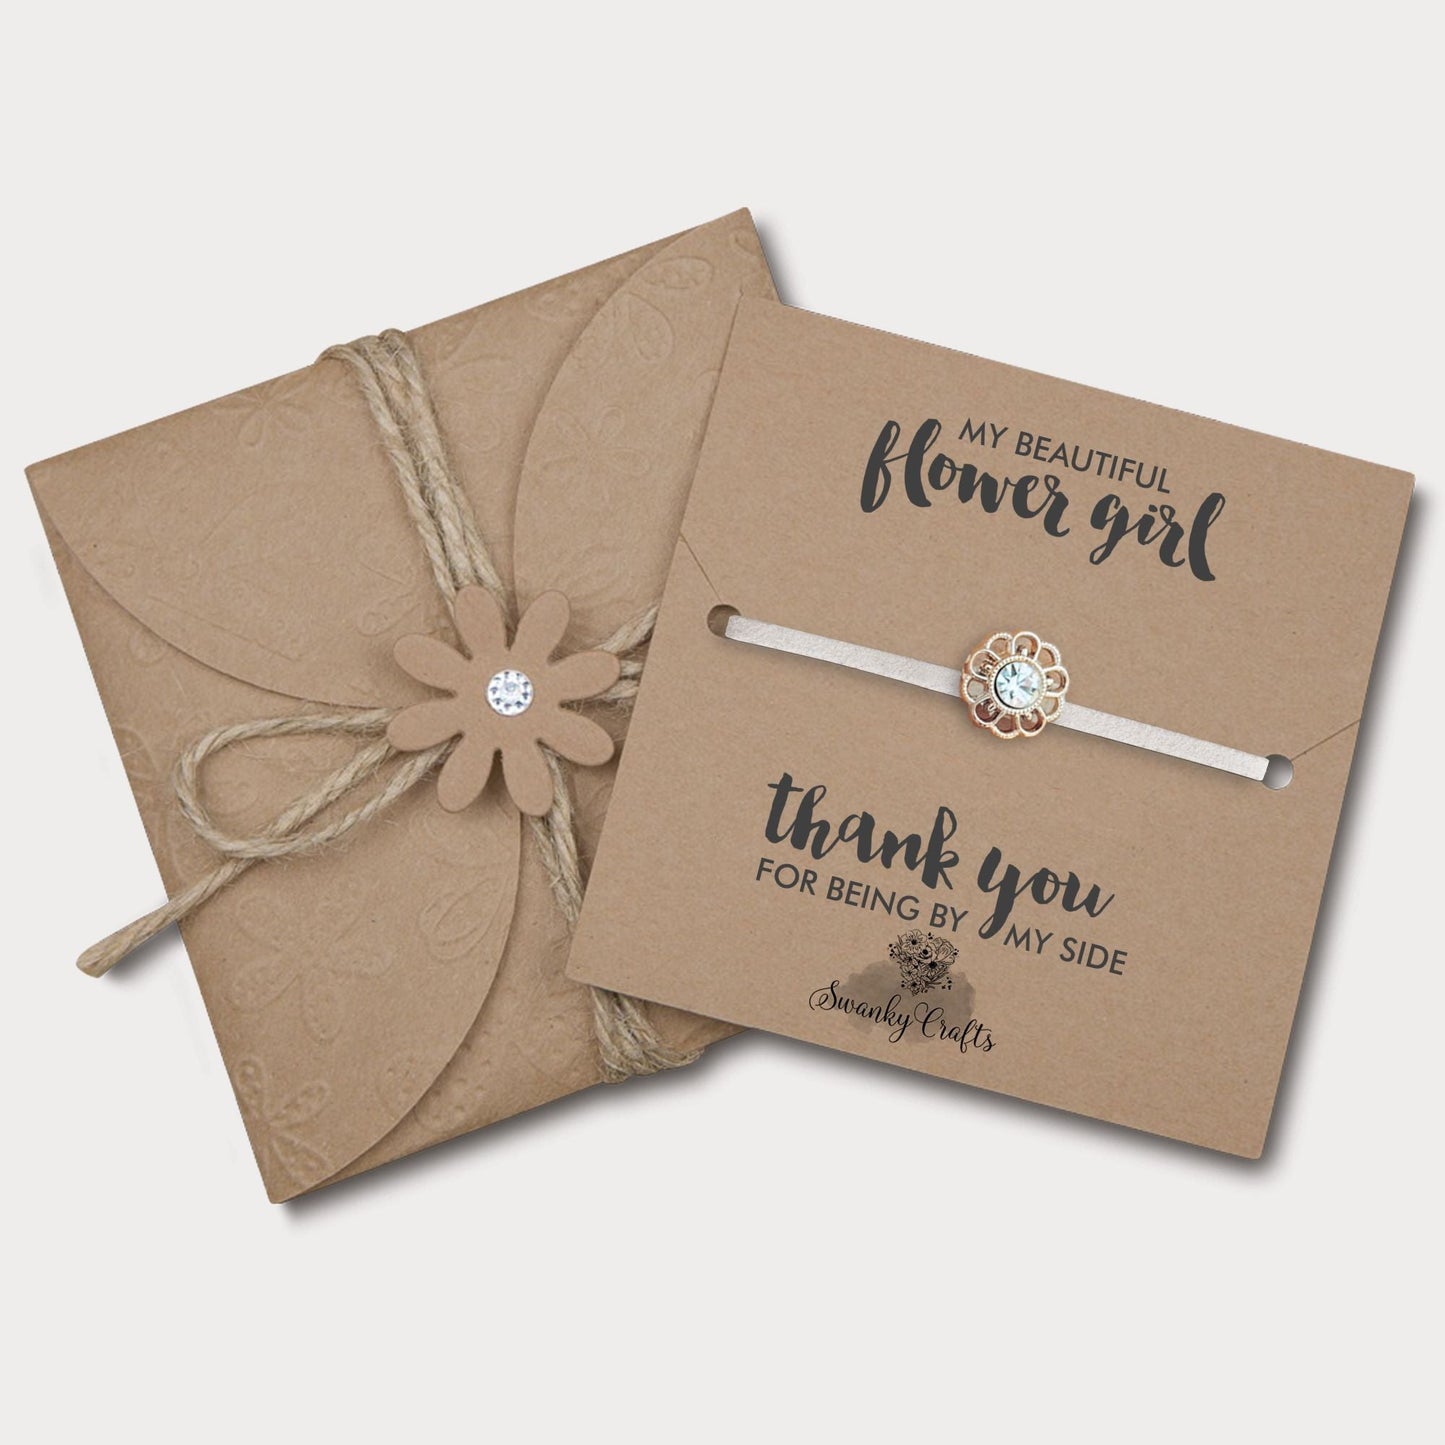 Thank You Bridesmaid Gift with Handmade Bracelet and Gift Wrap